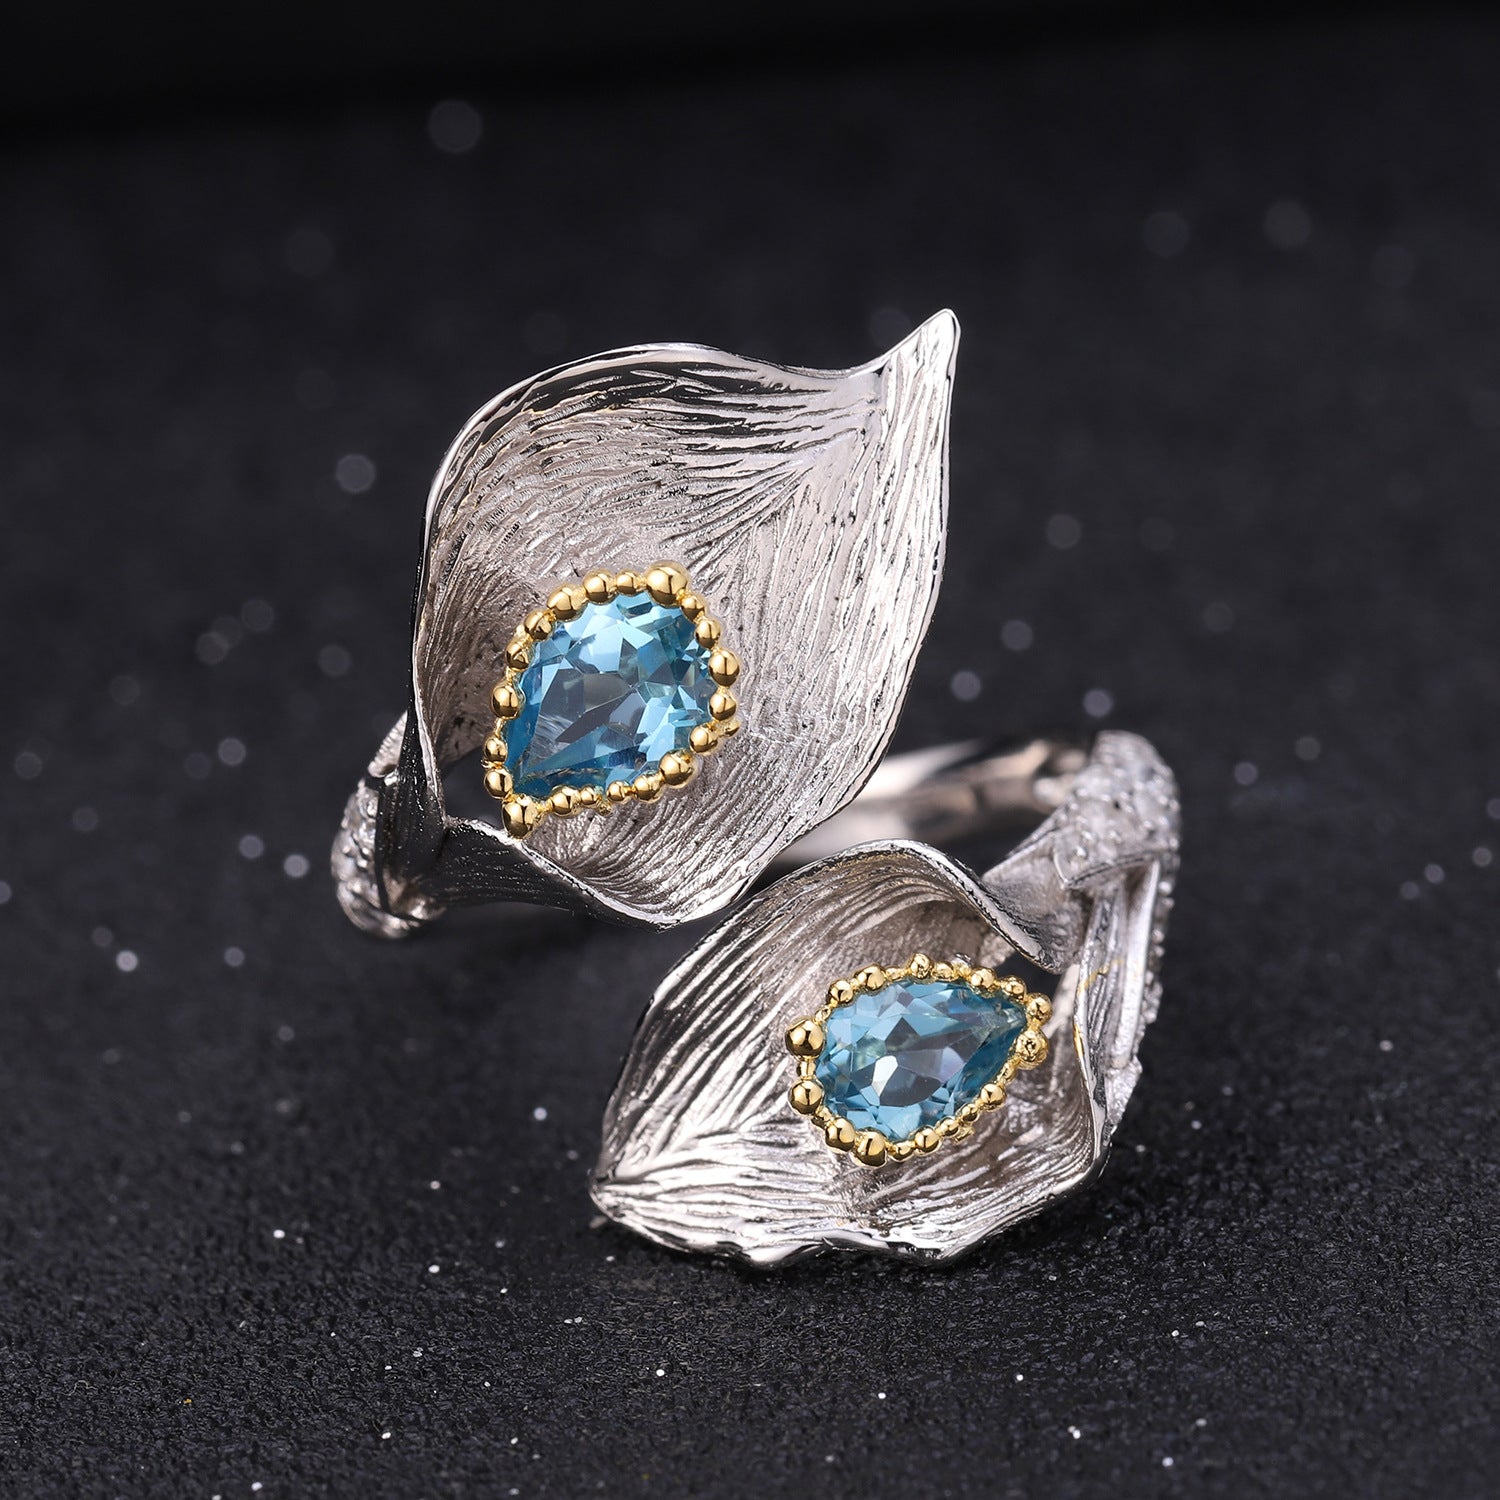 Antique Blue Topaz Ring - HERS